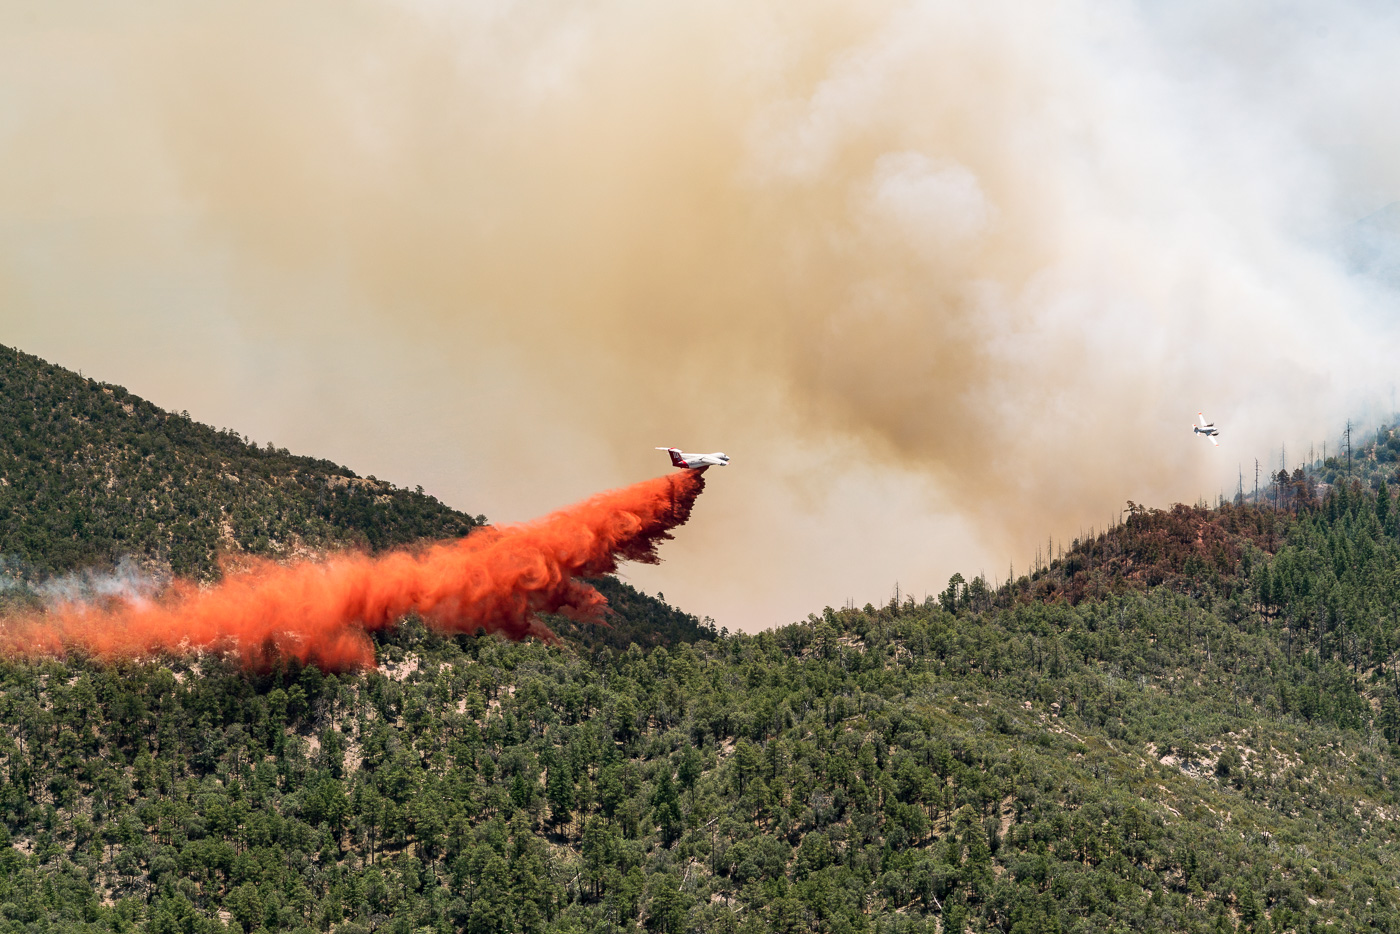 Airplanes drop fire retardant on flames trying to come over a ridge - near Guthrie Mountain. July 2017.